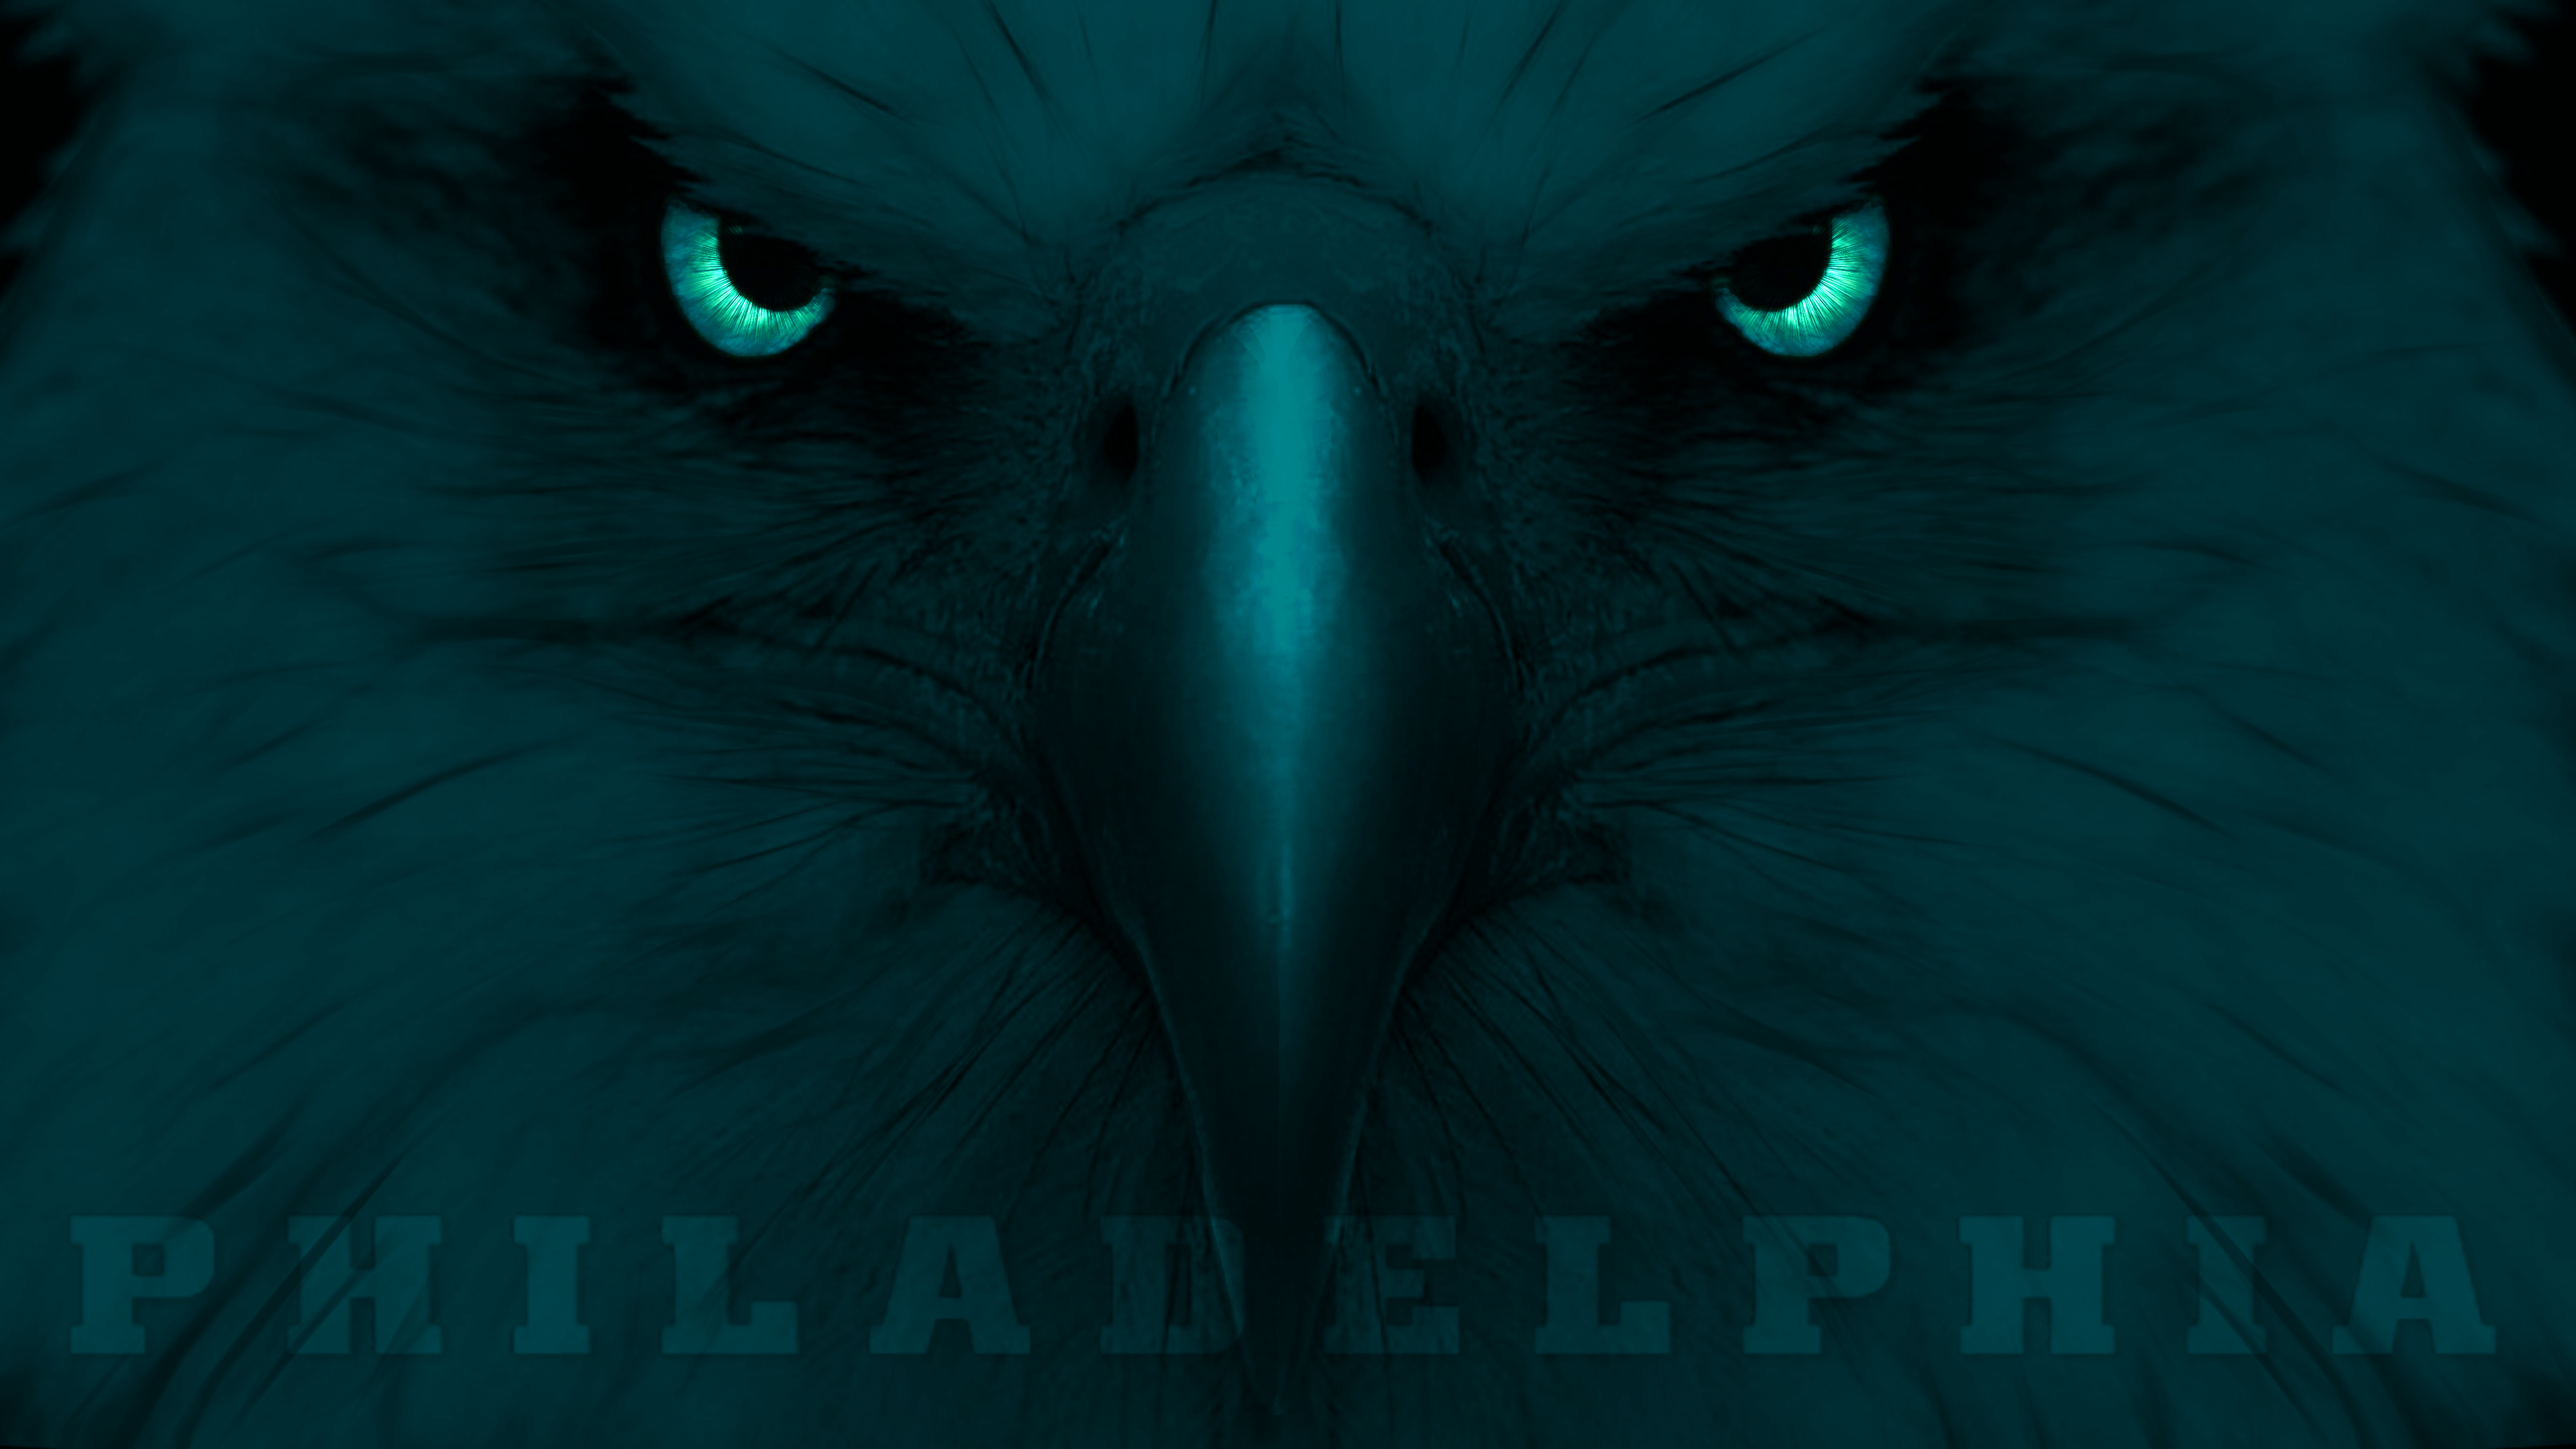 NFL Eagles 4K Wallpapers  Top Free NFL Eagles 4K Backgrounds   WallpaperAccess